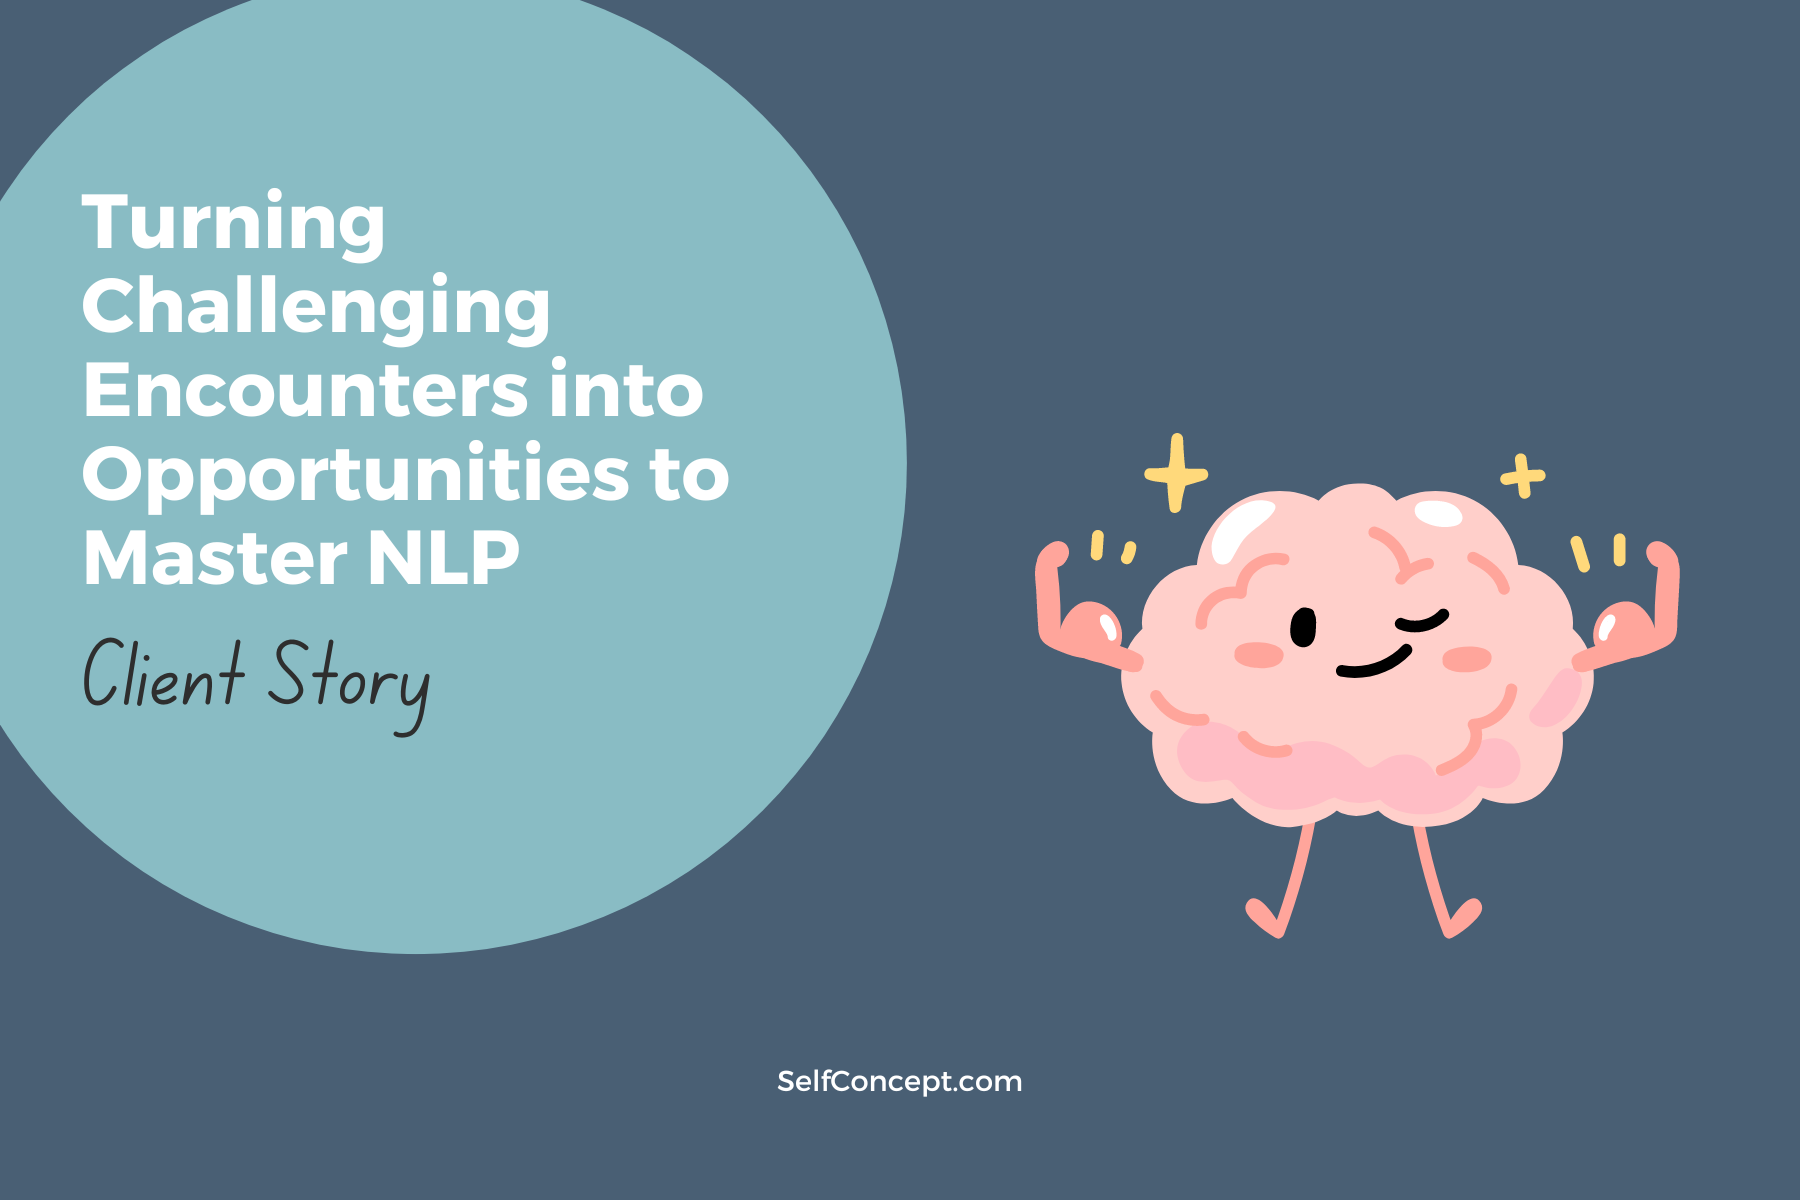 Turning Challenging Encounters into Opportunities to Master NLP